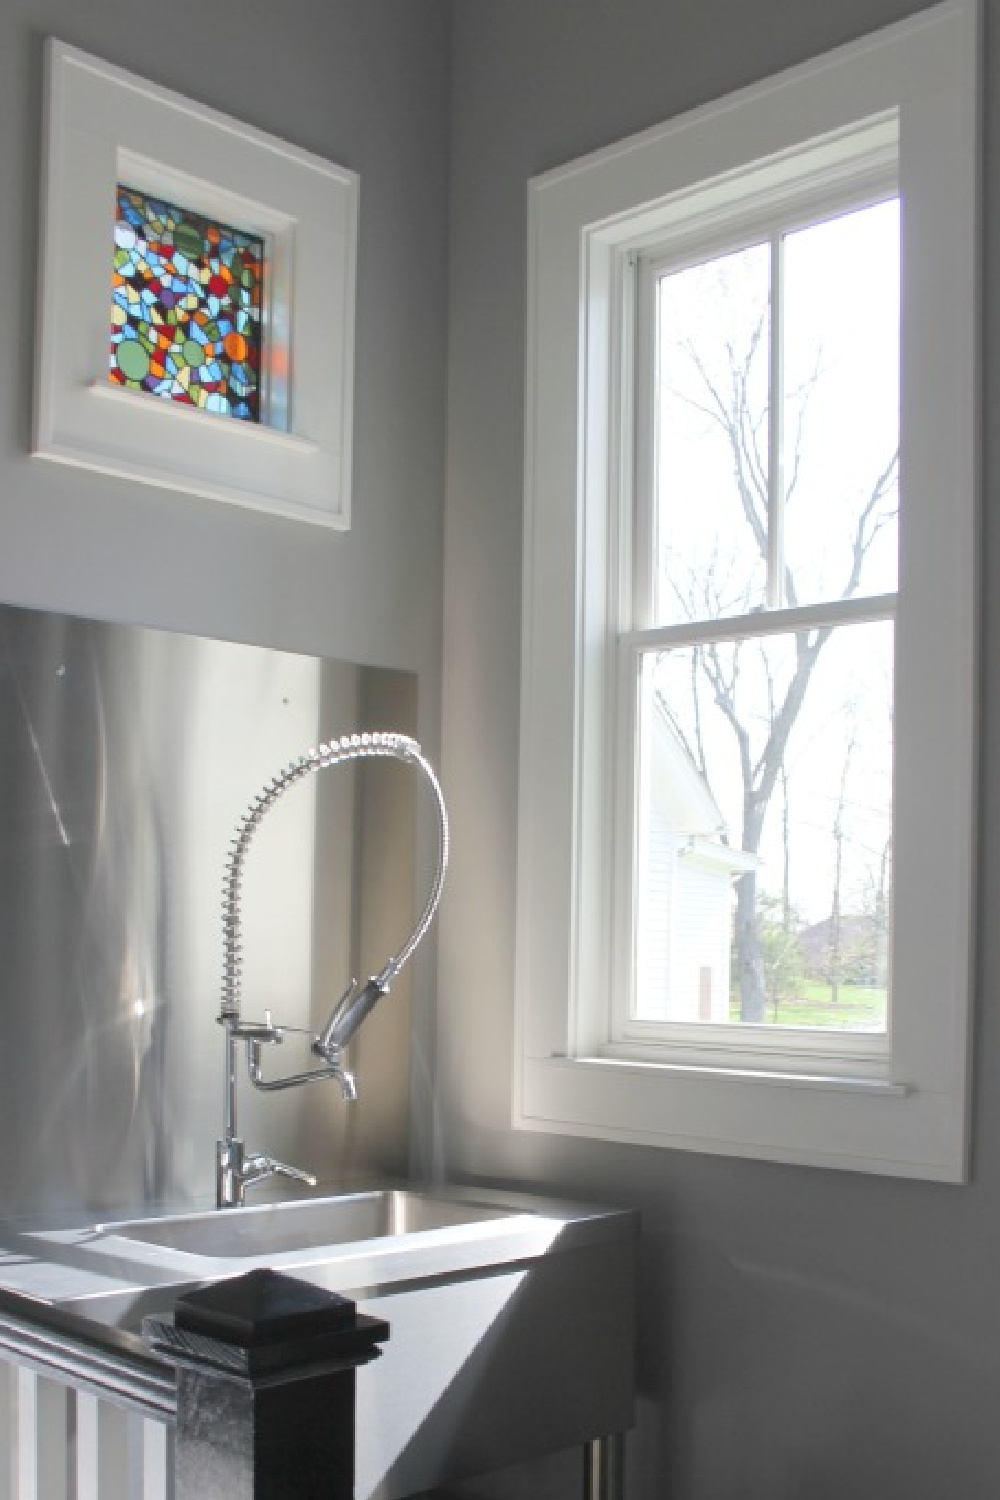 Stainless commercial style sink in mud room with stained glass window - Hello Lovely Studio.